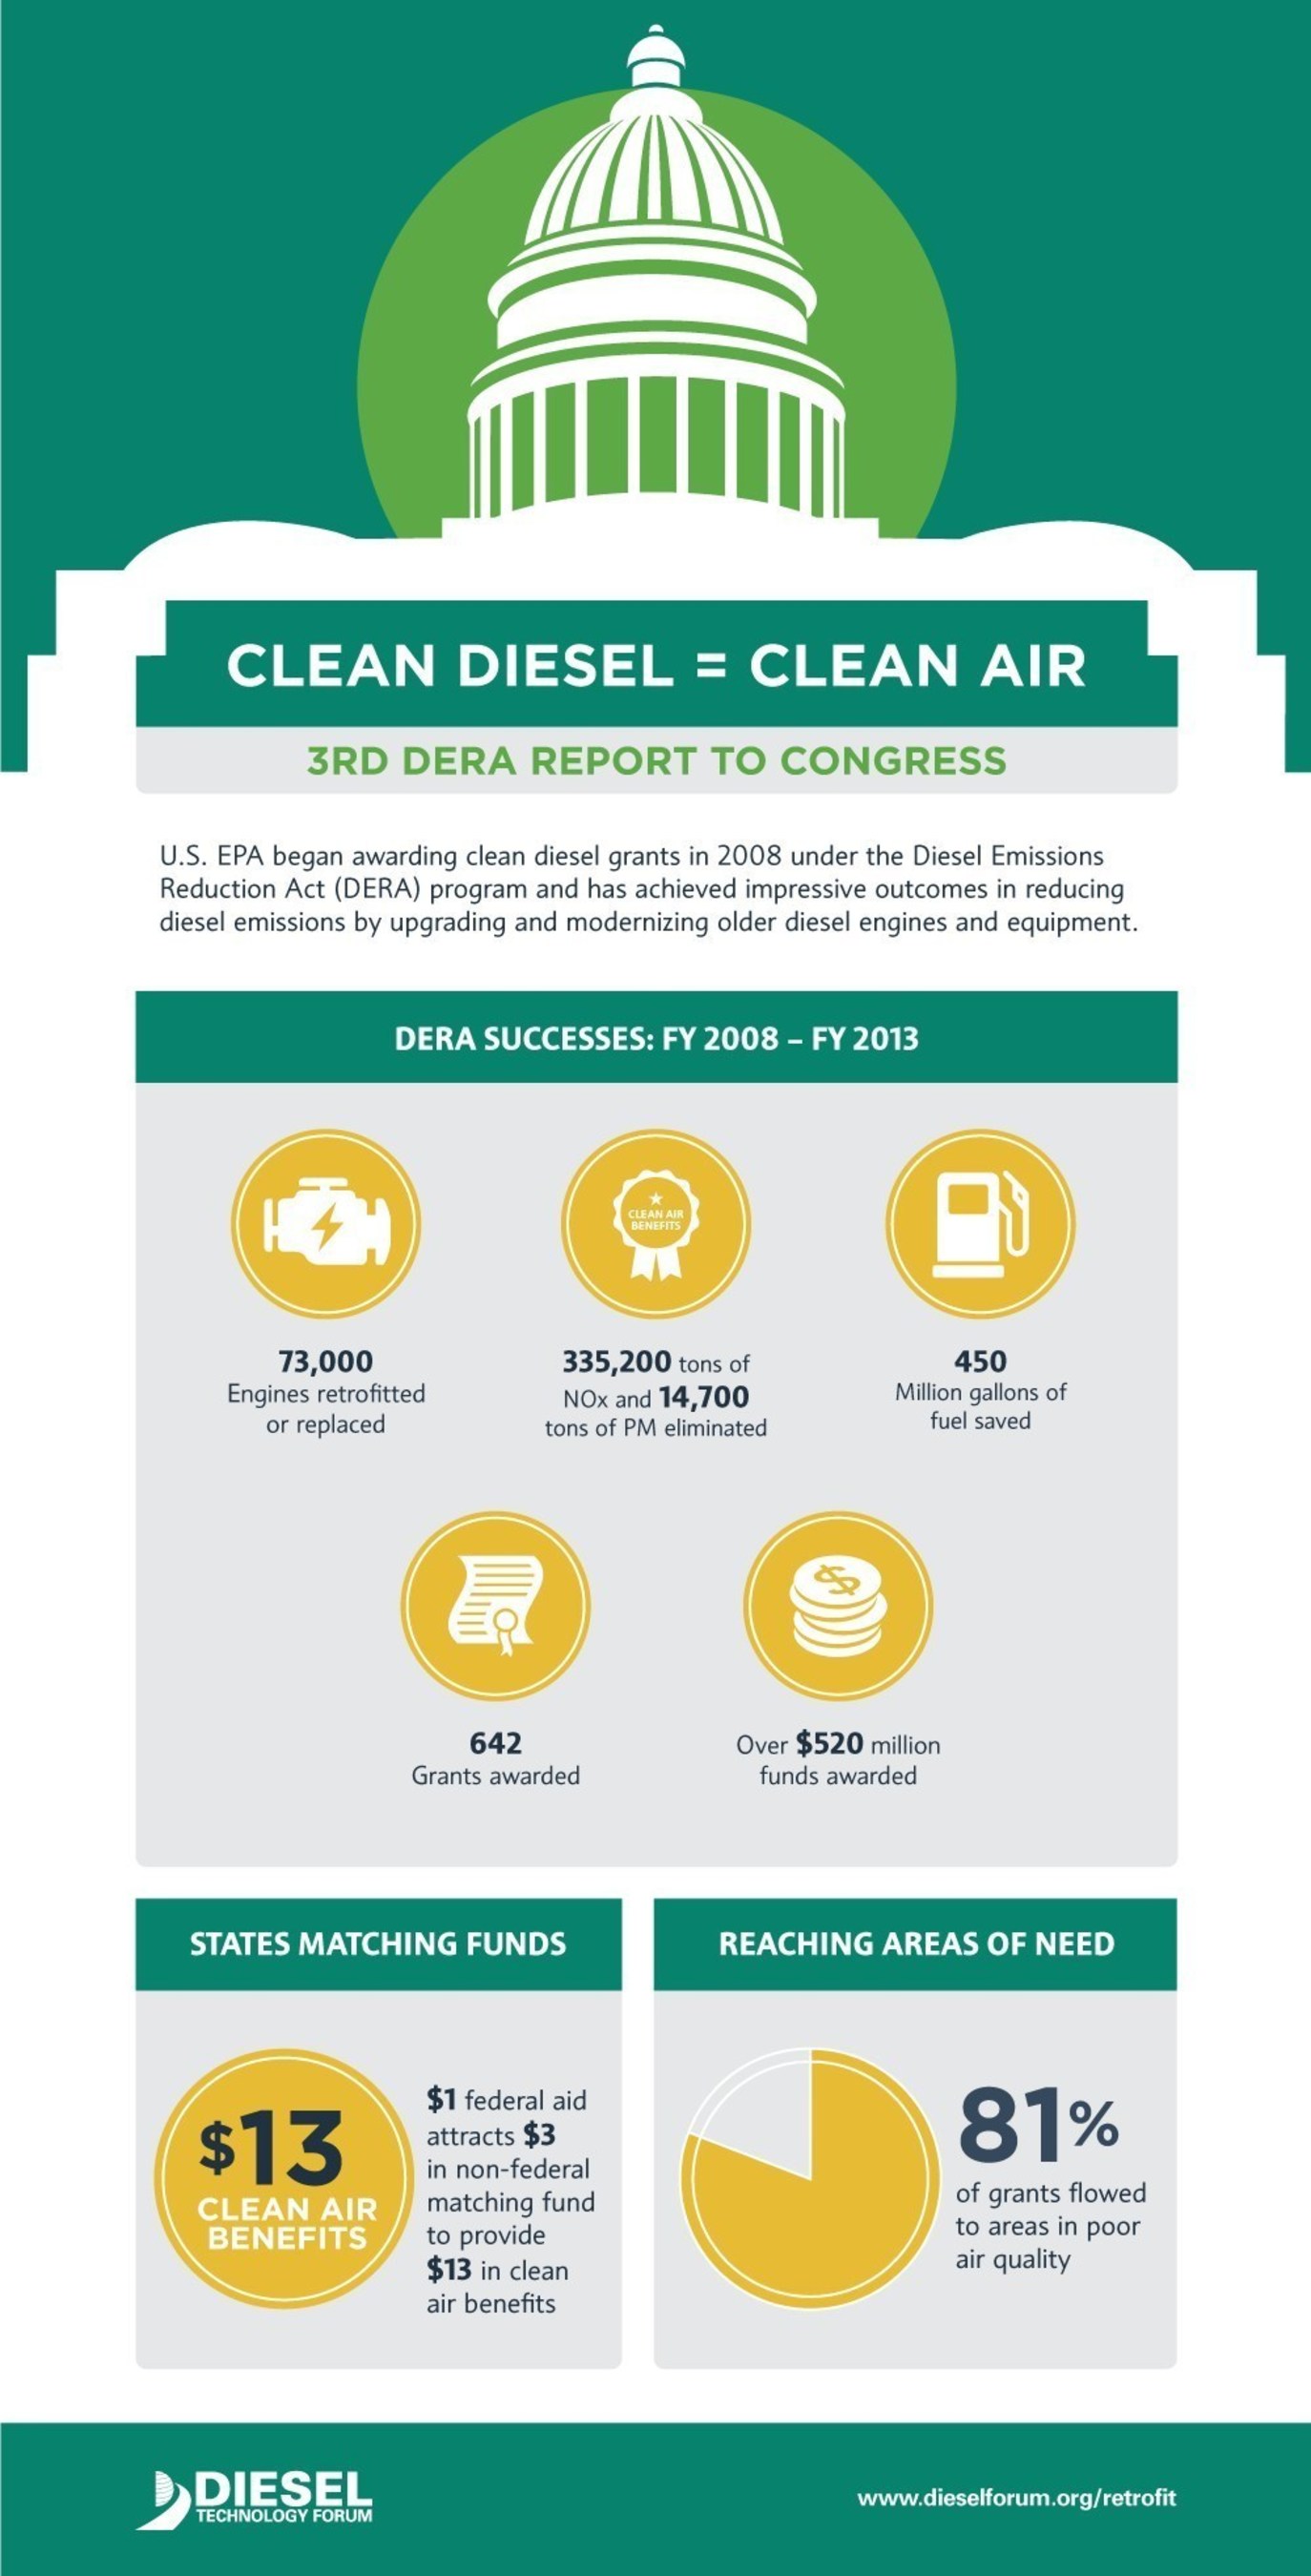 The Diesel Emission Reduction Act (DERA) has funded the modernization and upgrades of more than 73,000 diesel engines resulting in major clean air benefits and fuel savings in communities throughout all 50 states.  While new diesel technology and fuels now achieve near zero emission levels, DERA is the leading program that reduces emissions in the older diesel legacy engines.